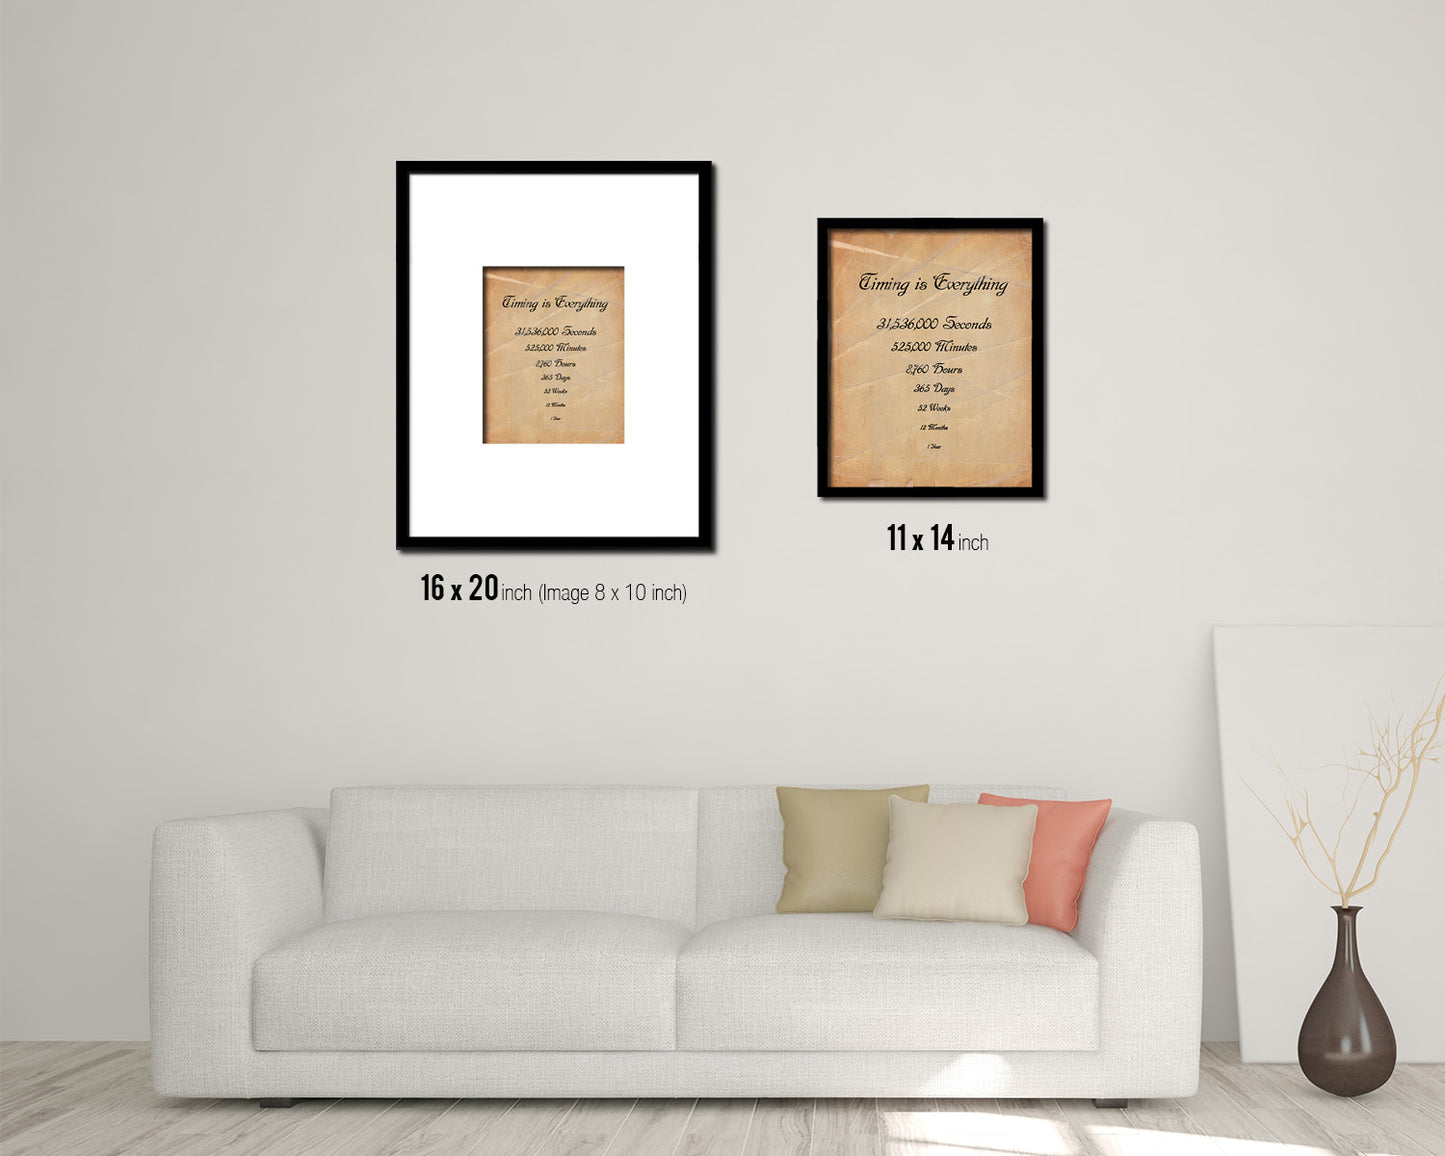 Timing is everything 1 Year 12 Months Quote Paper Artwork Framed Print Wall Decor Art